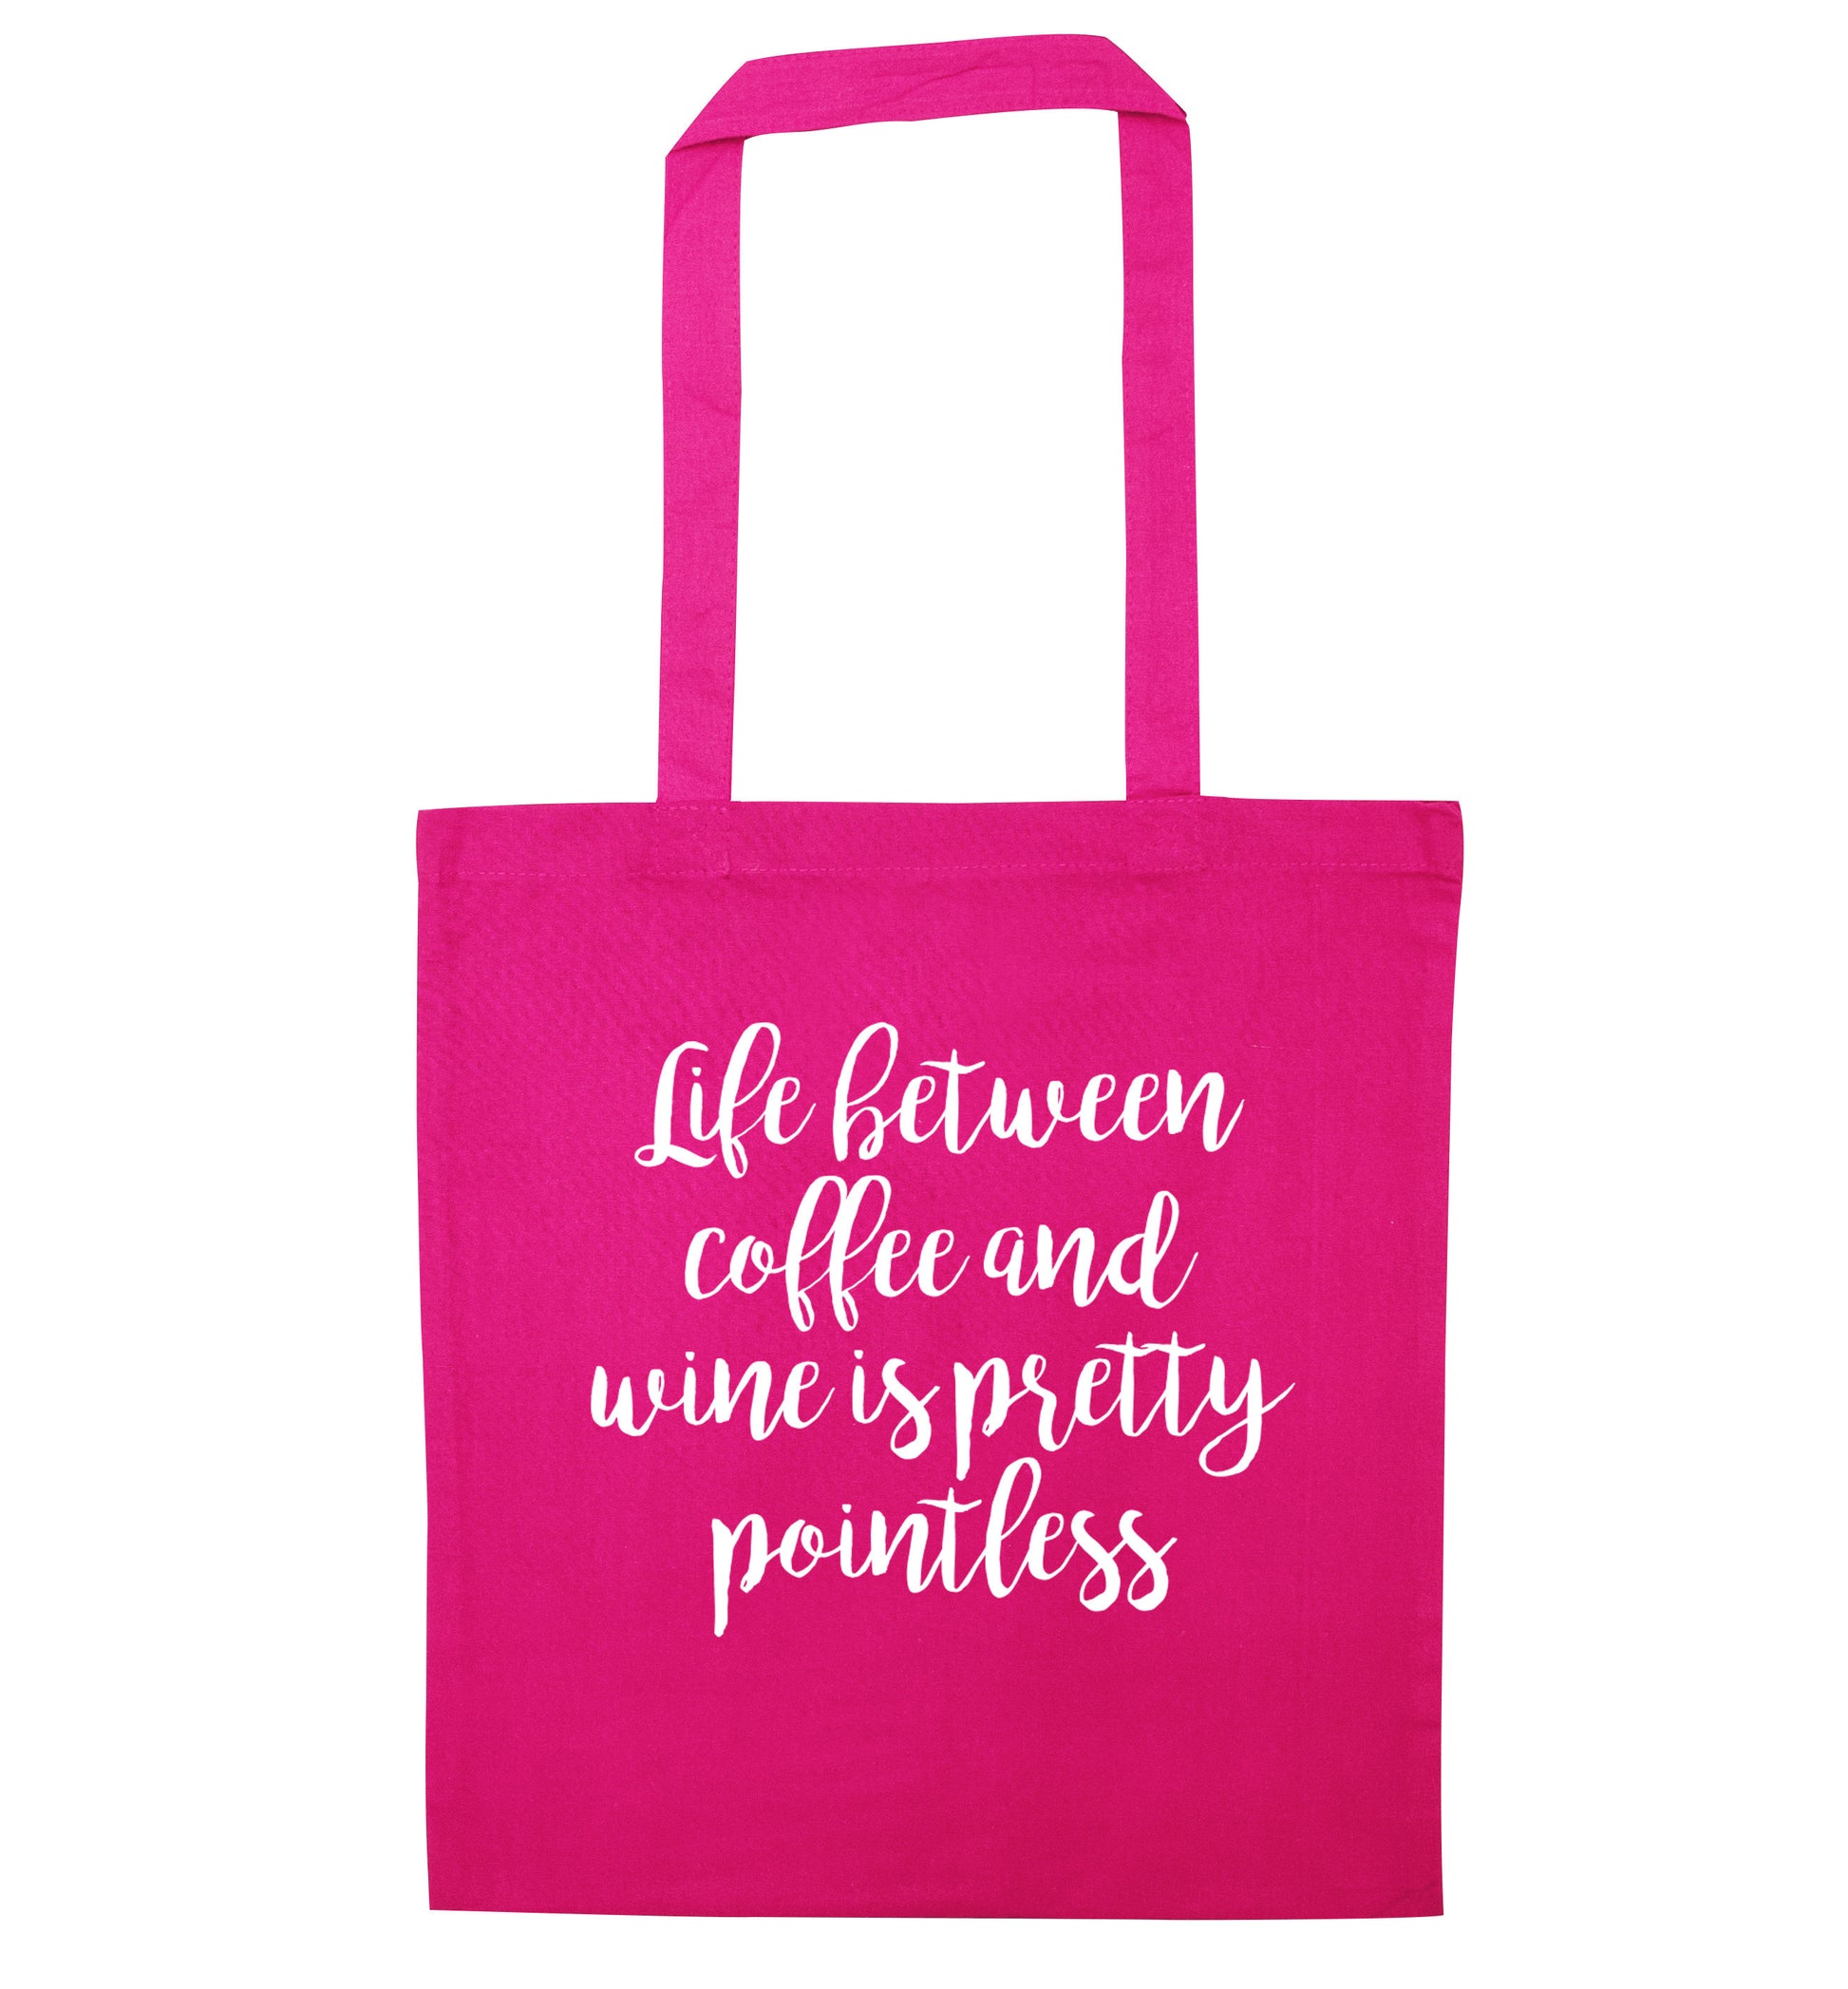 Life between coffee and wine is pretty pointless pink tote bag